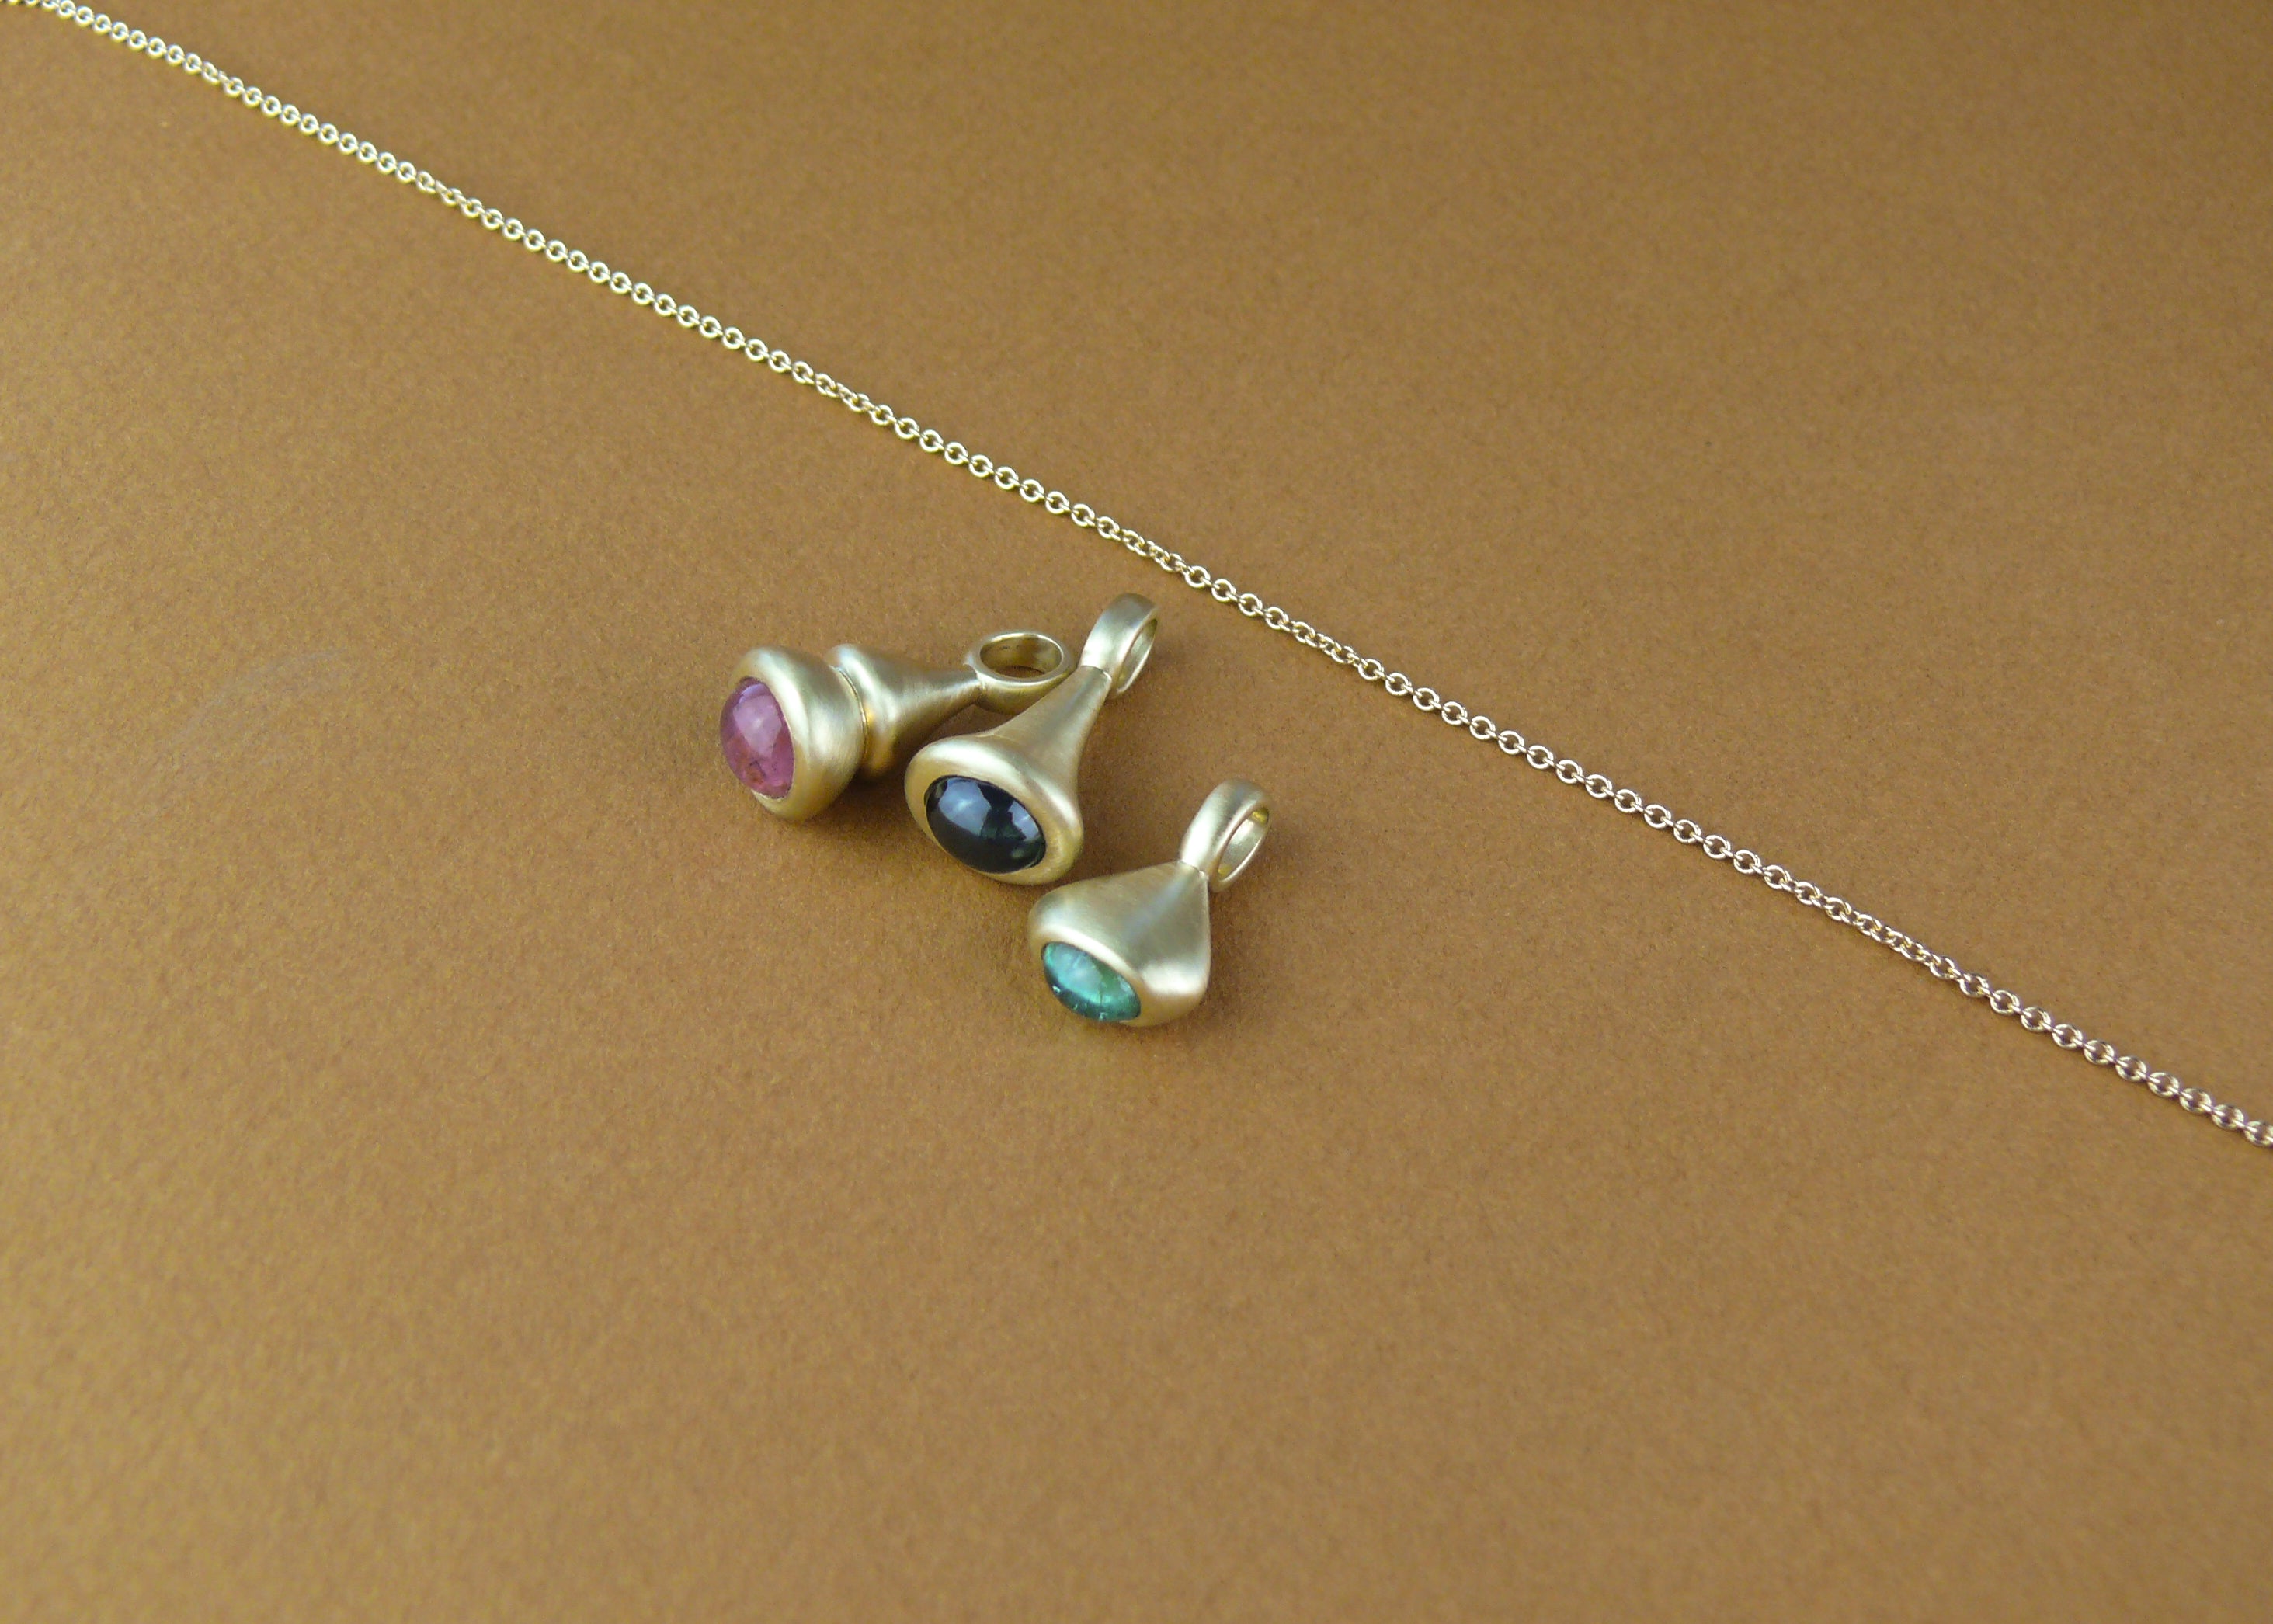 Gold Pendulum Charms with pink tourmaline, blue sapphire, and teal tourmaline on brown paper